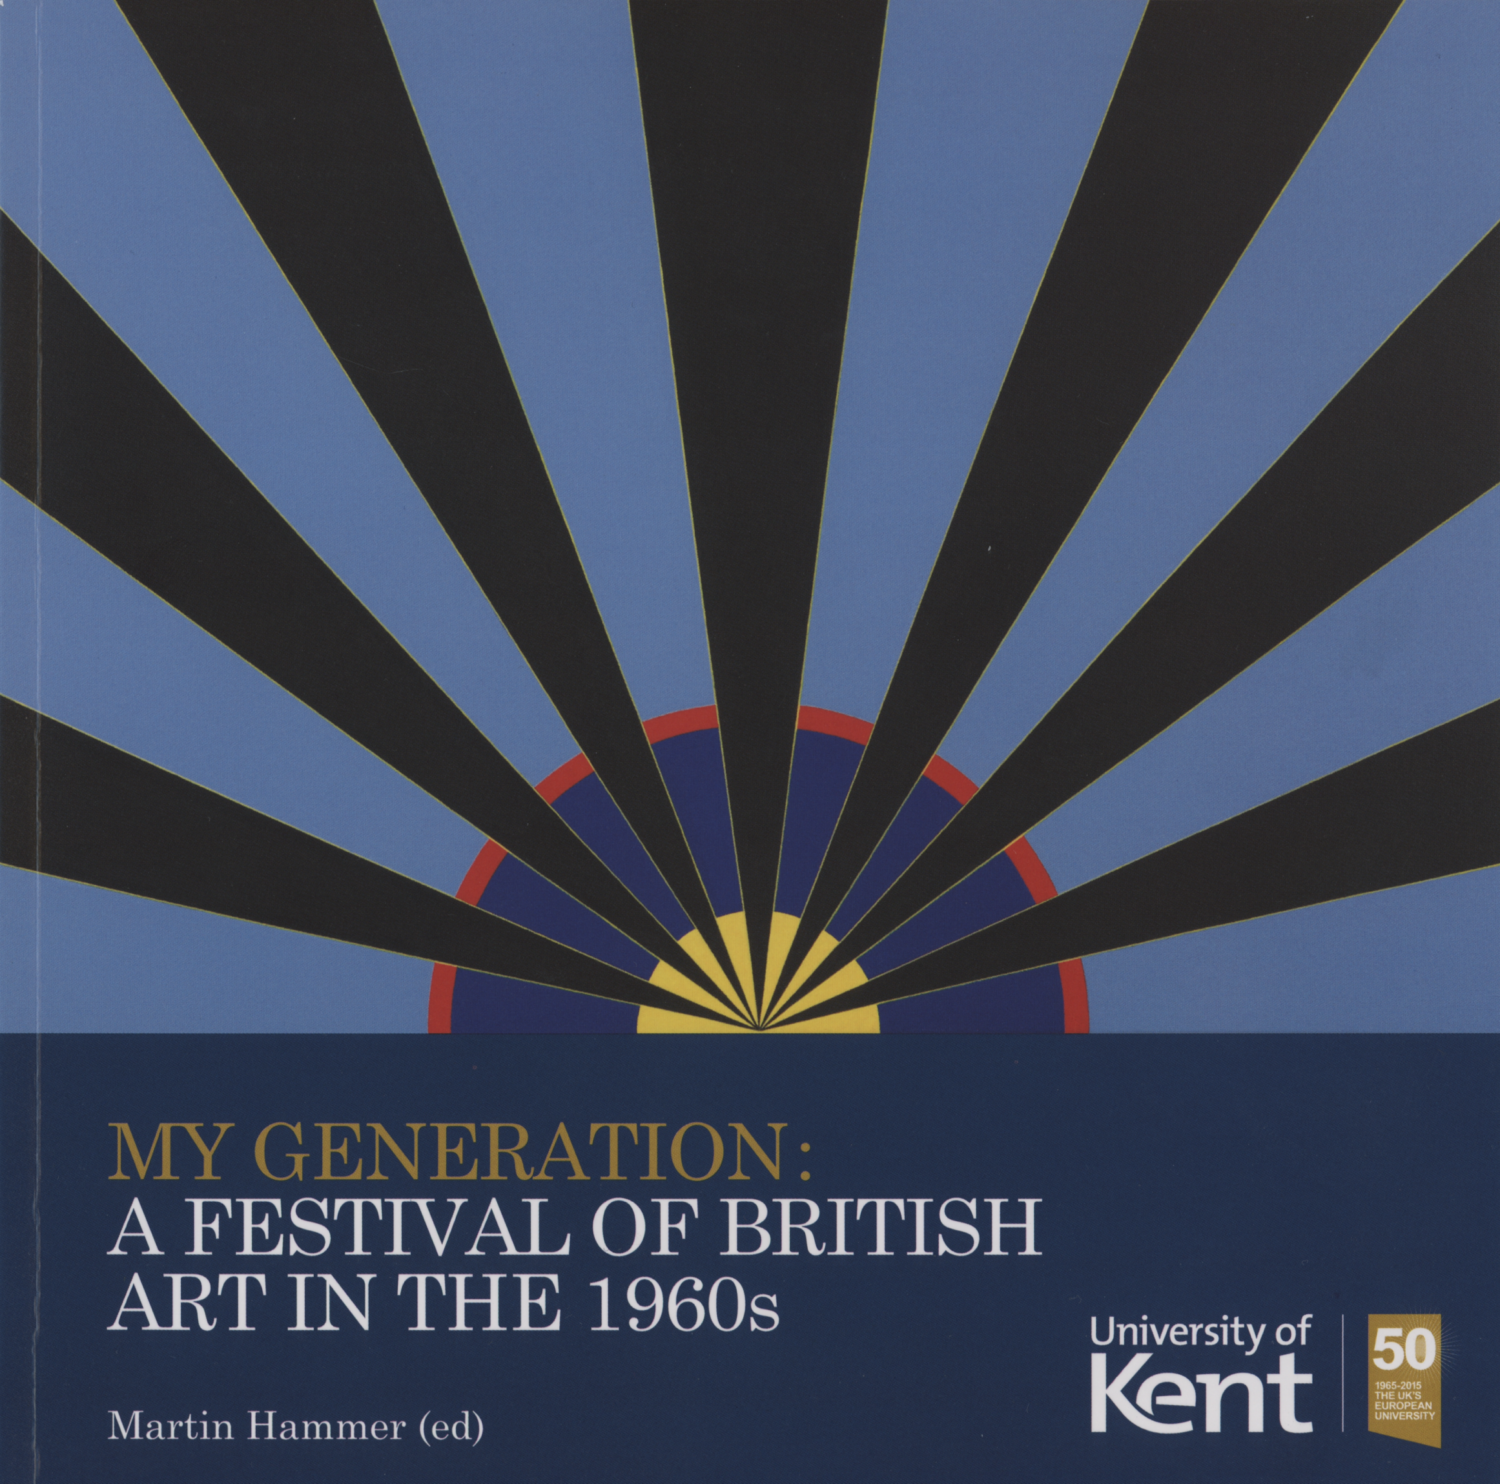 My Generation: A Festival of British Art in the 1960’s